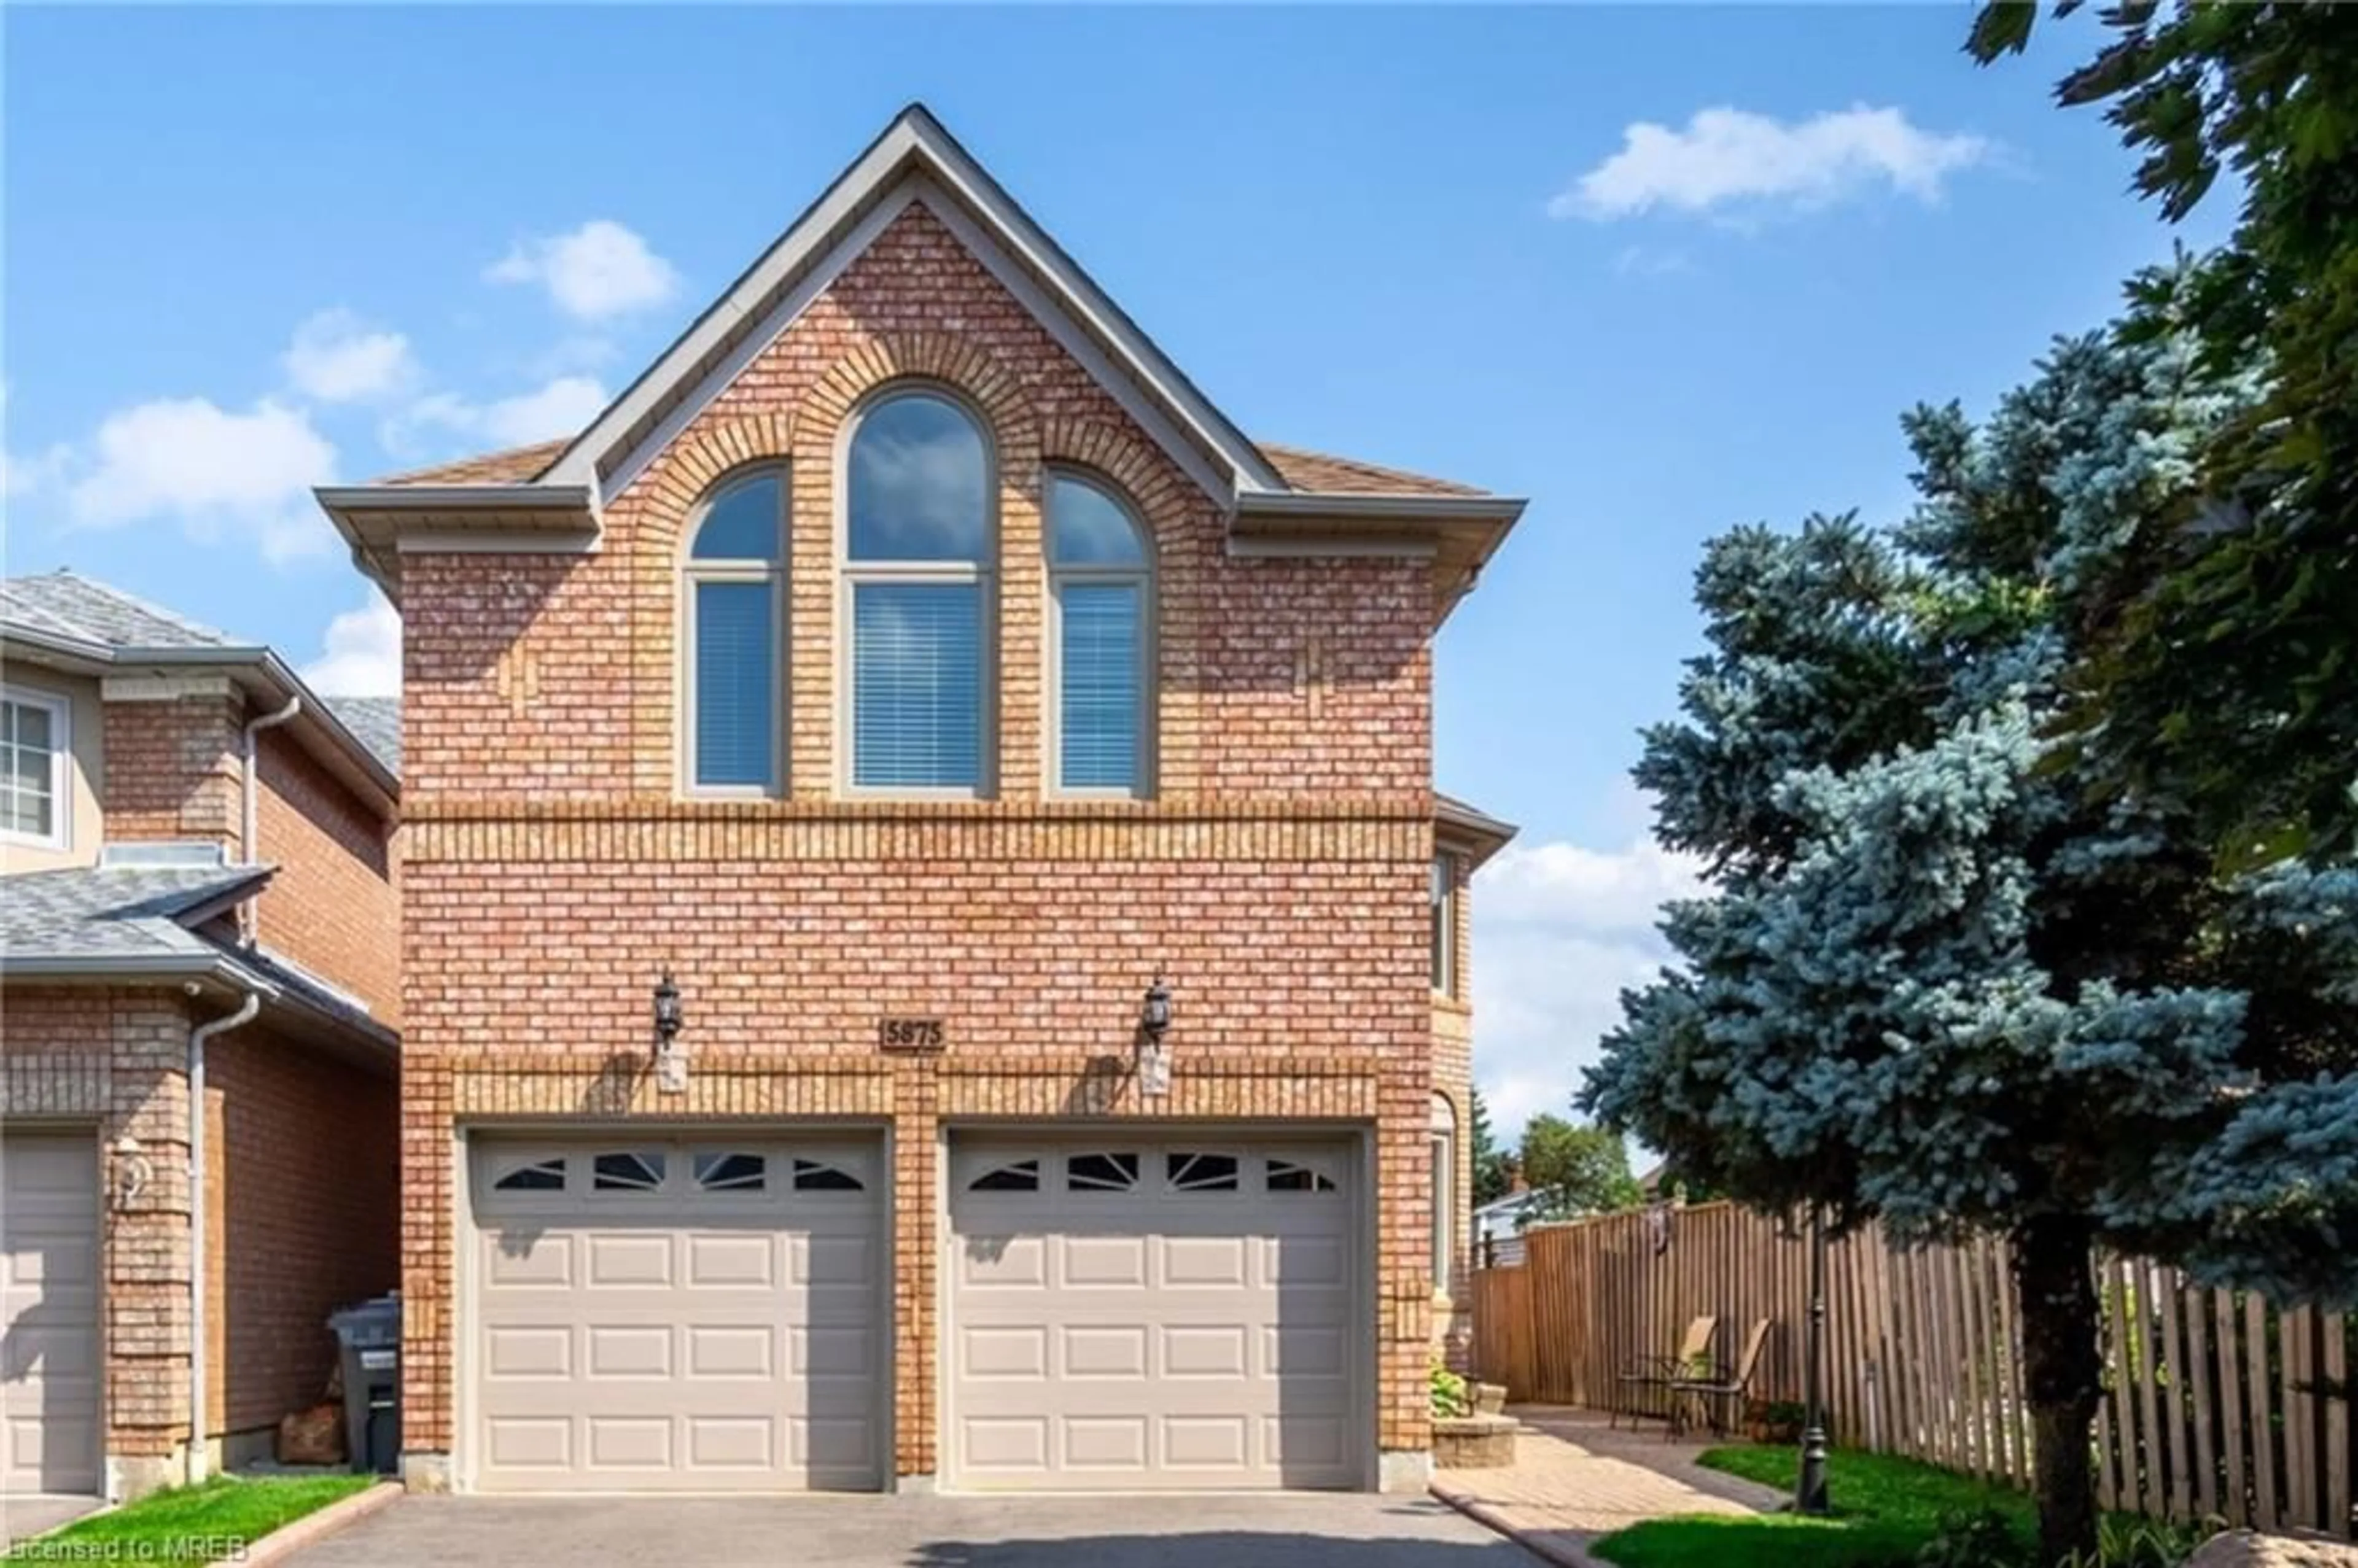 Home with brick exterior material for 5875 Mersey St, Mississauga Ontario L5V 1V9